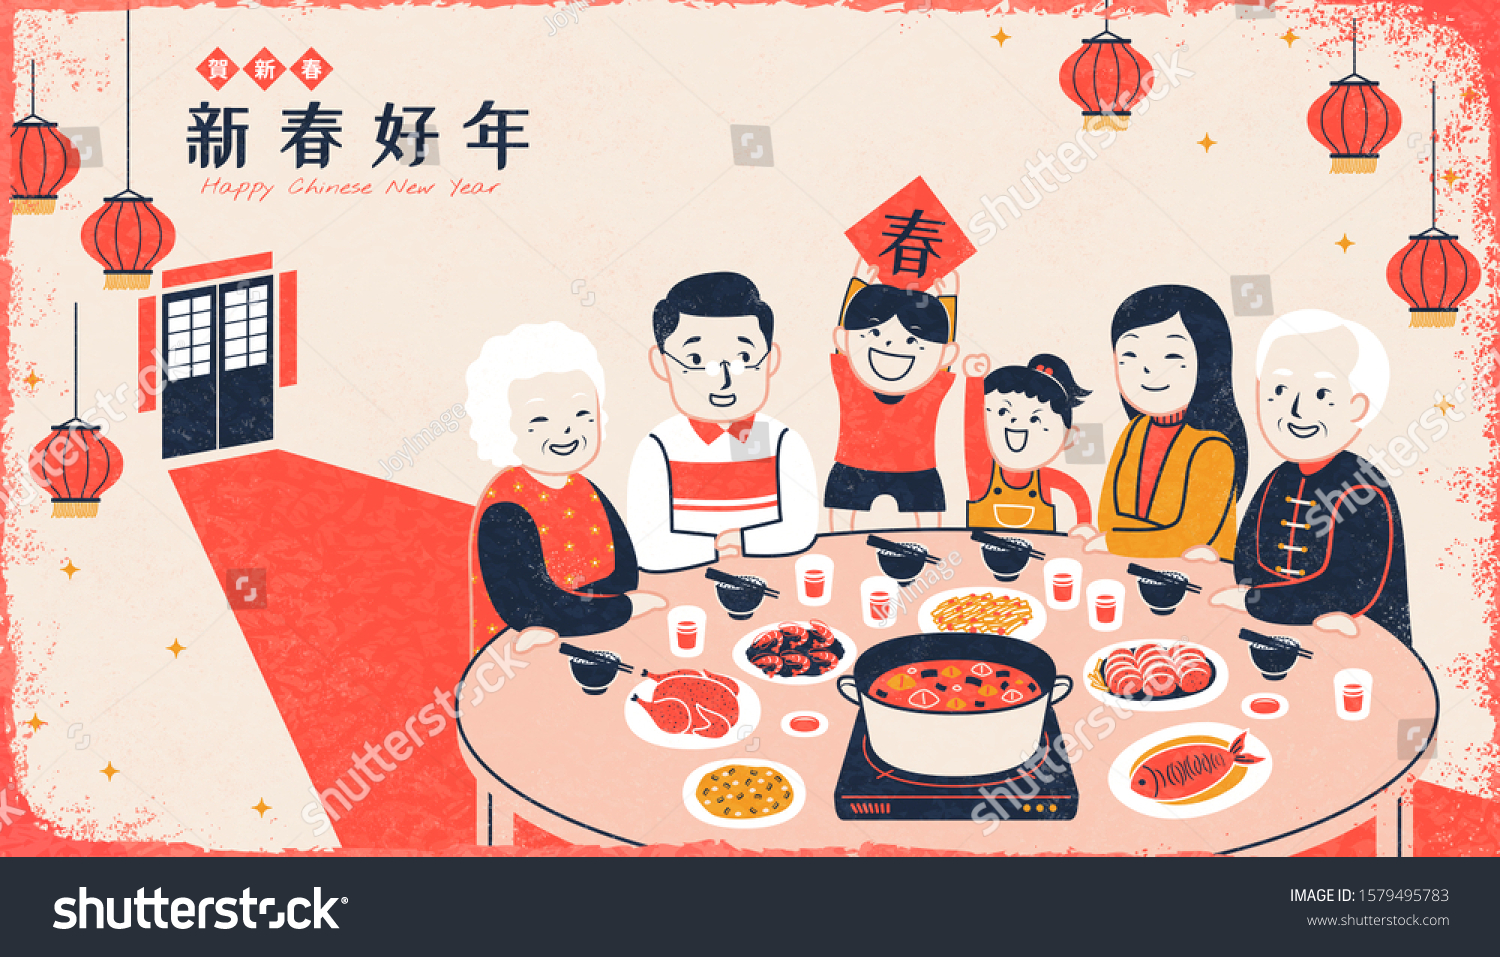 SVG of Silkscreen style family reunion dinner illustration, Chinese text translation: Spring, Wish you a good year svg